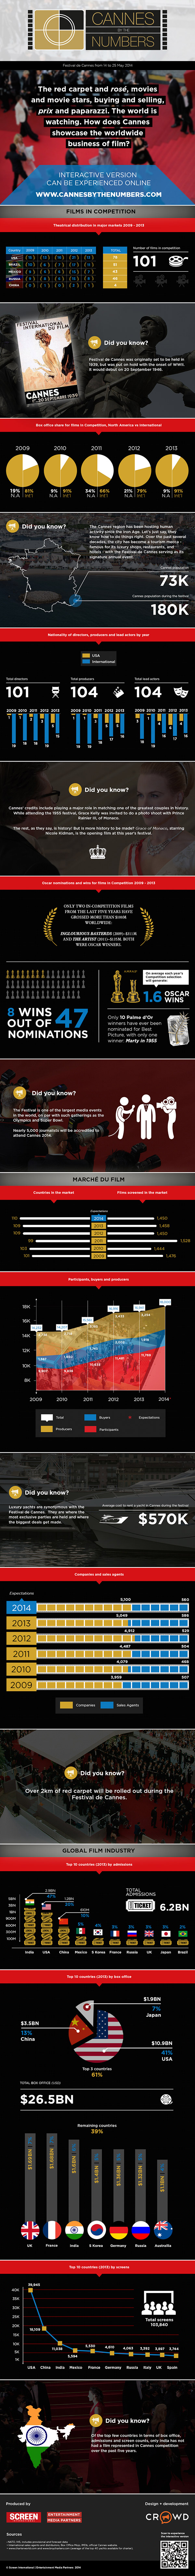 Cannes Film festival 2014 Infographic